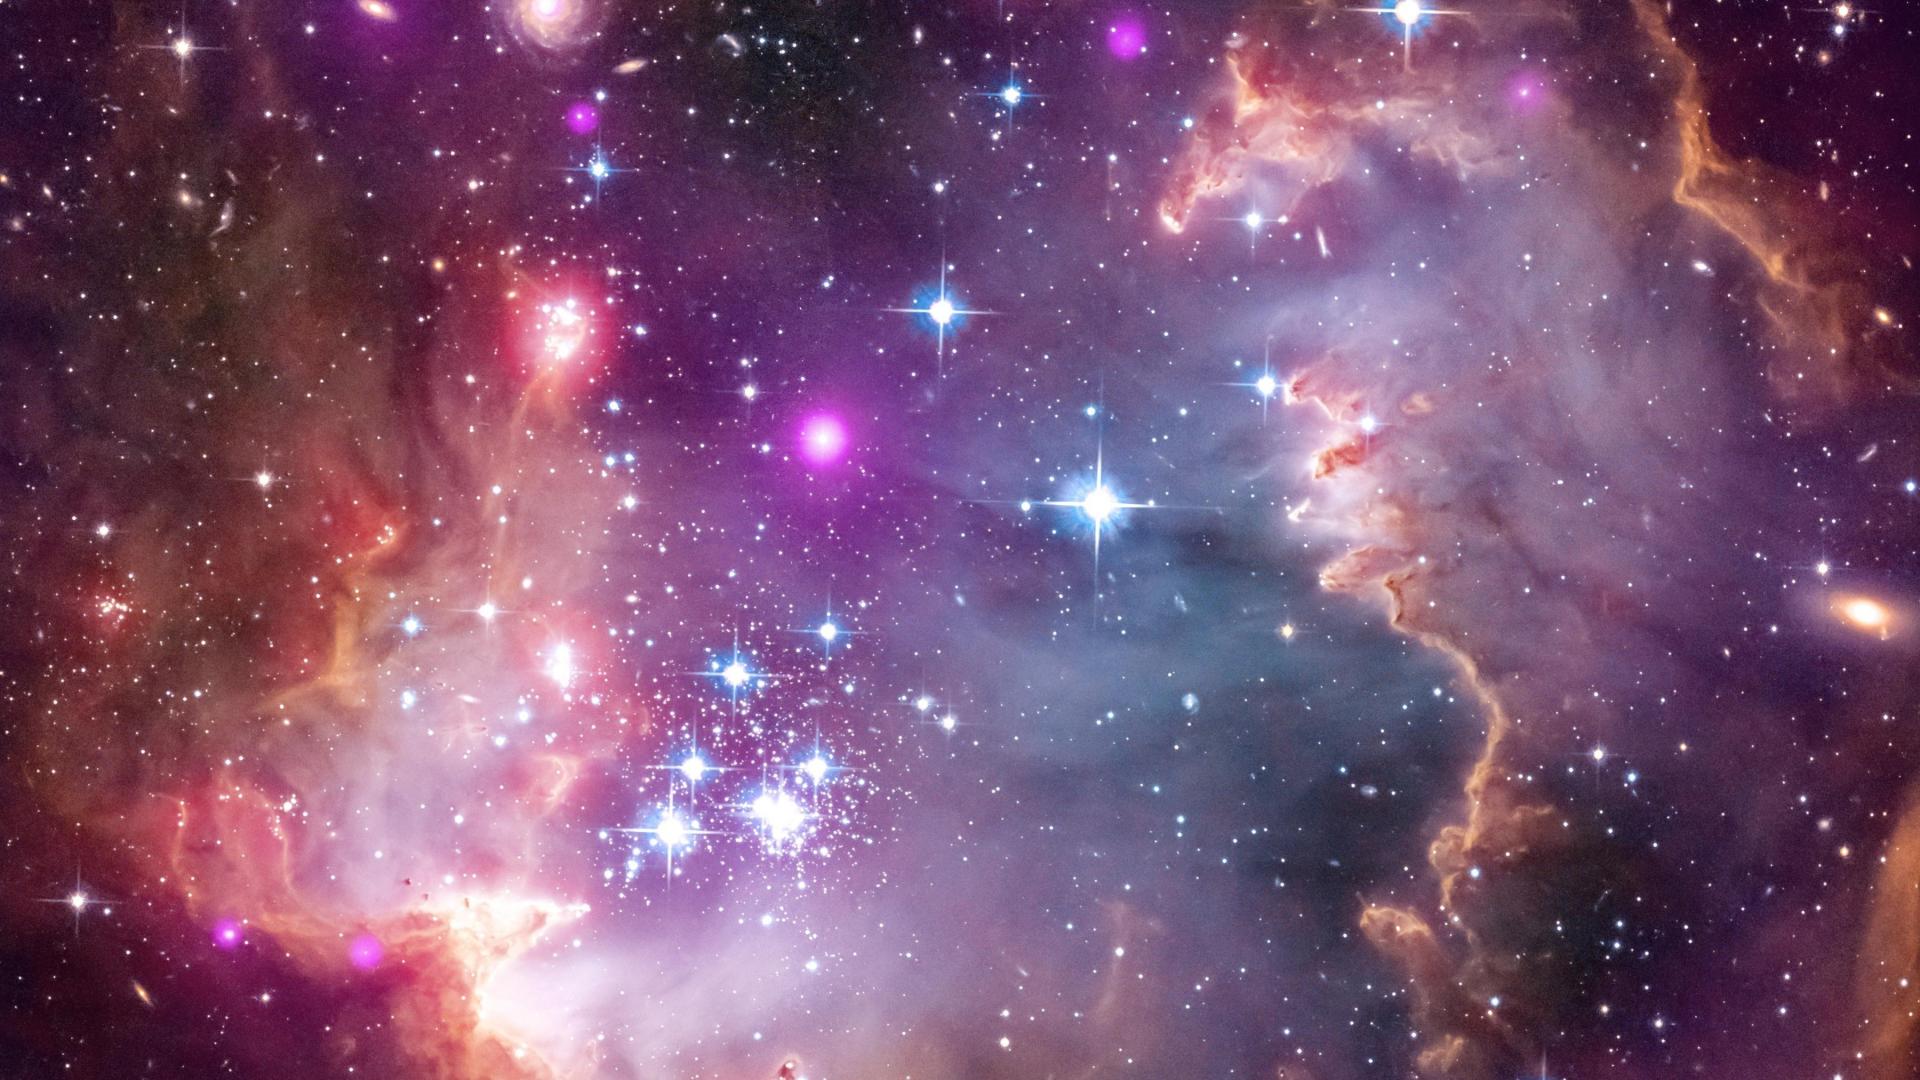 Outer space wallpaper 70362